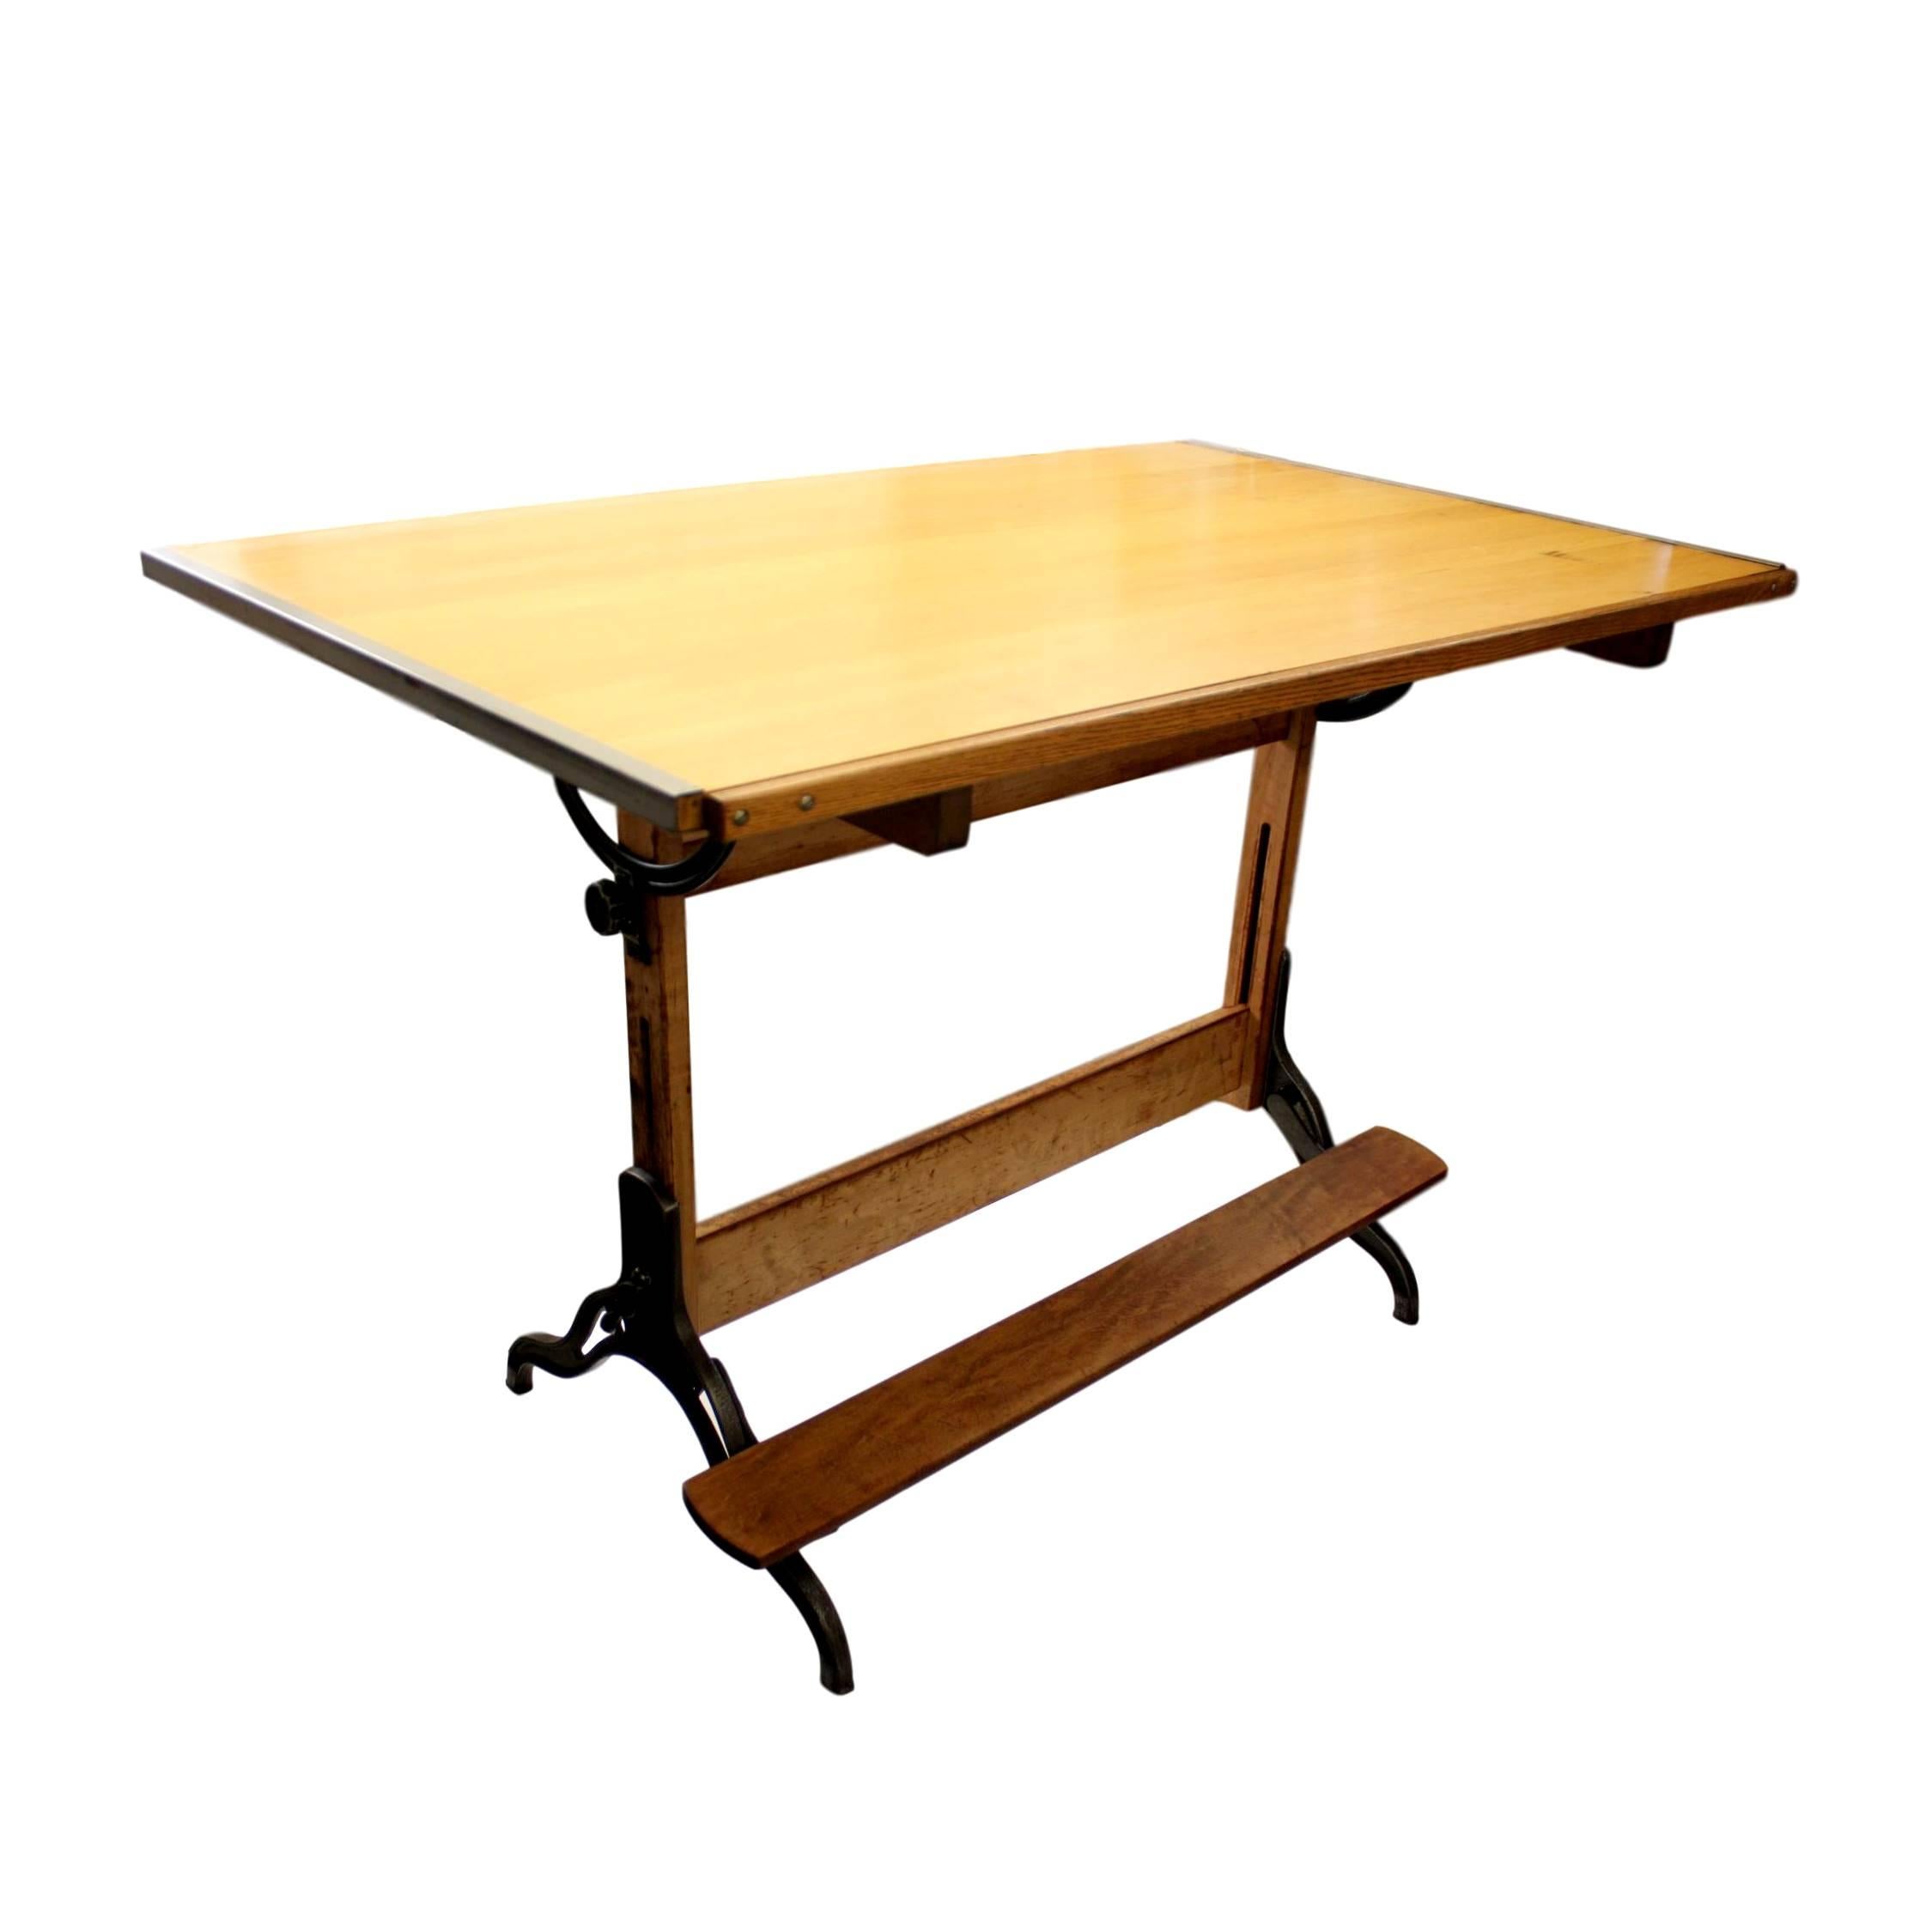 This charming little drafting table has everything going for it. The perfect size (60